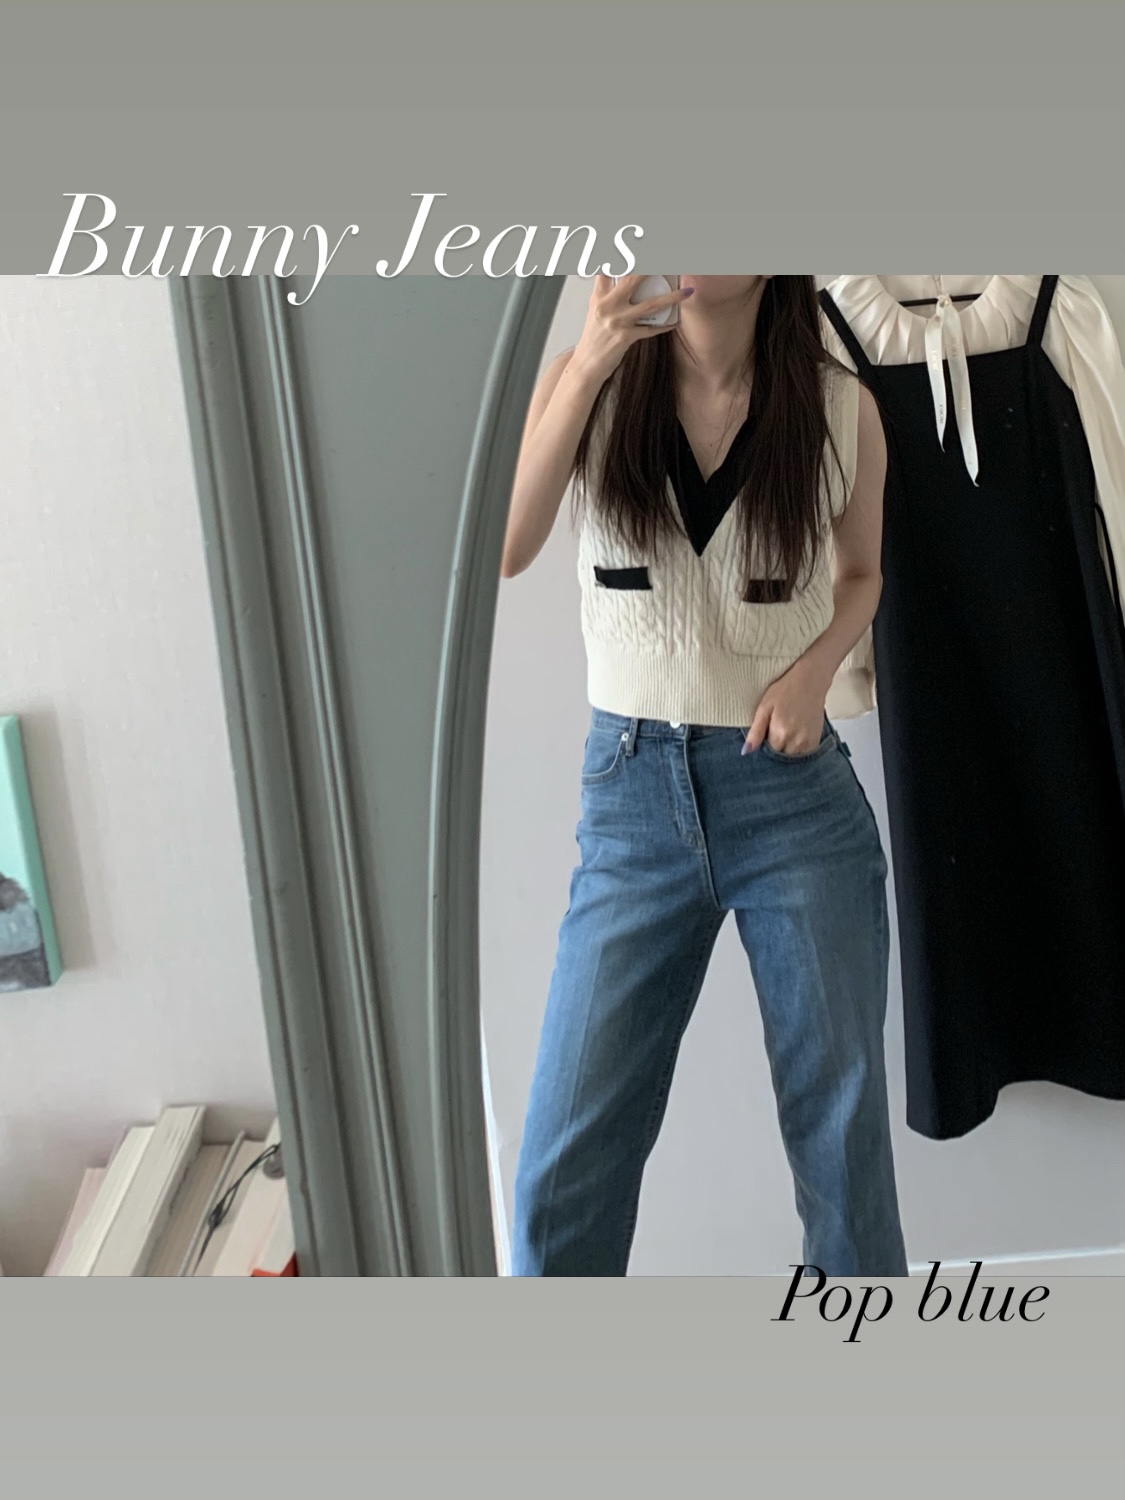 Bunny Jeans